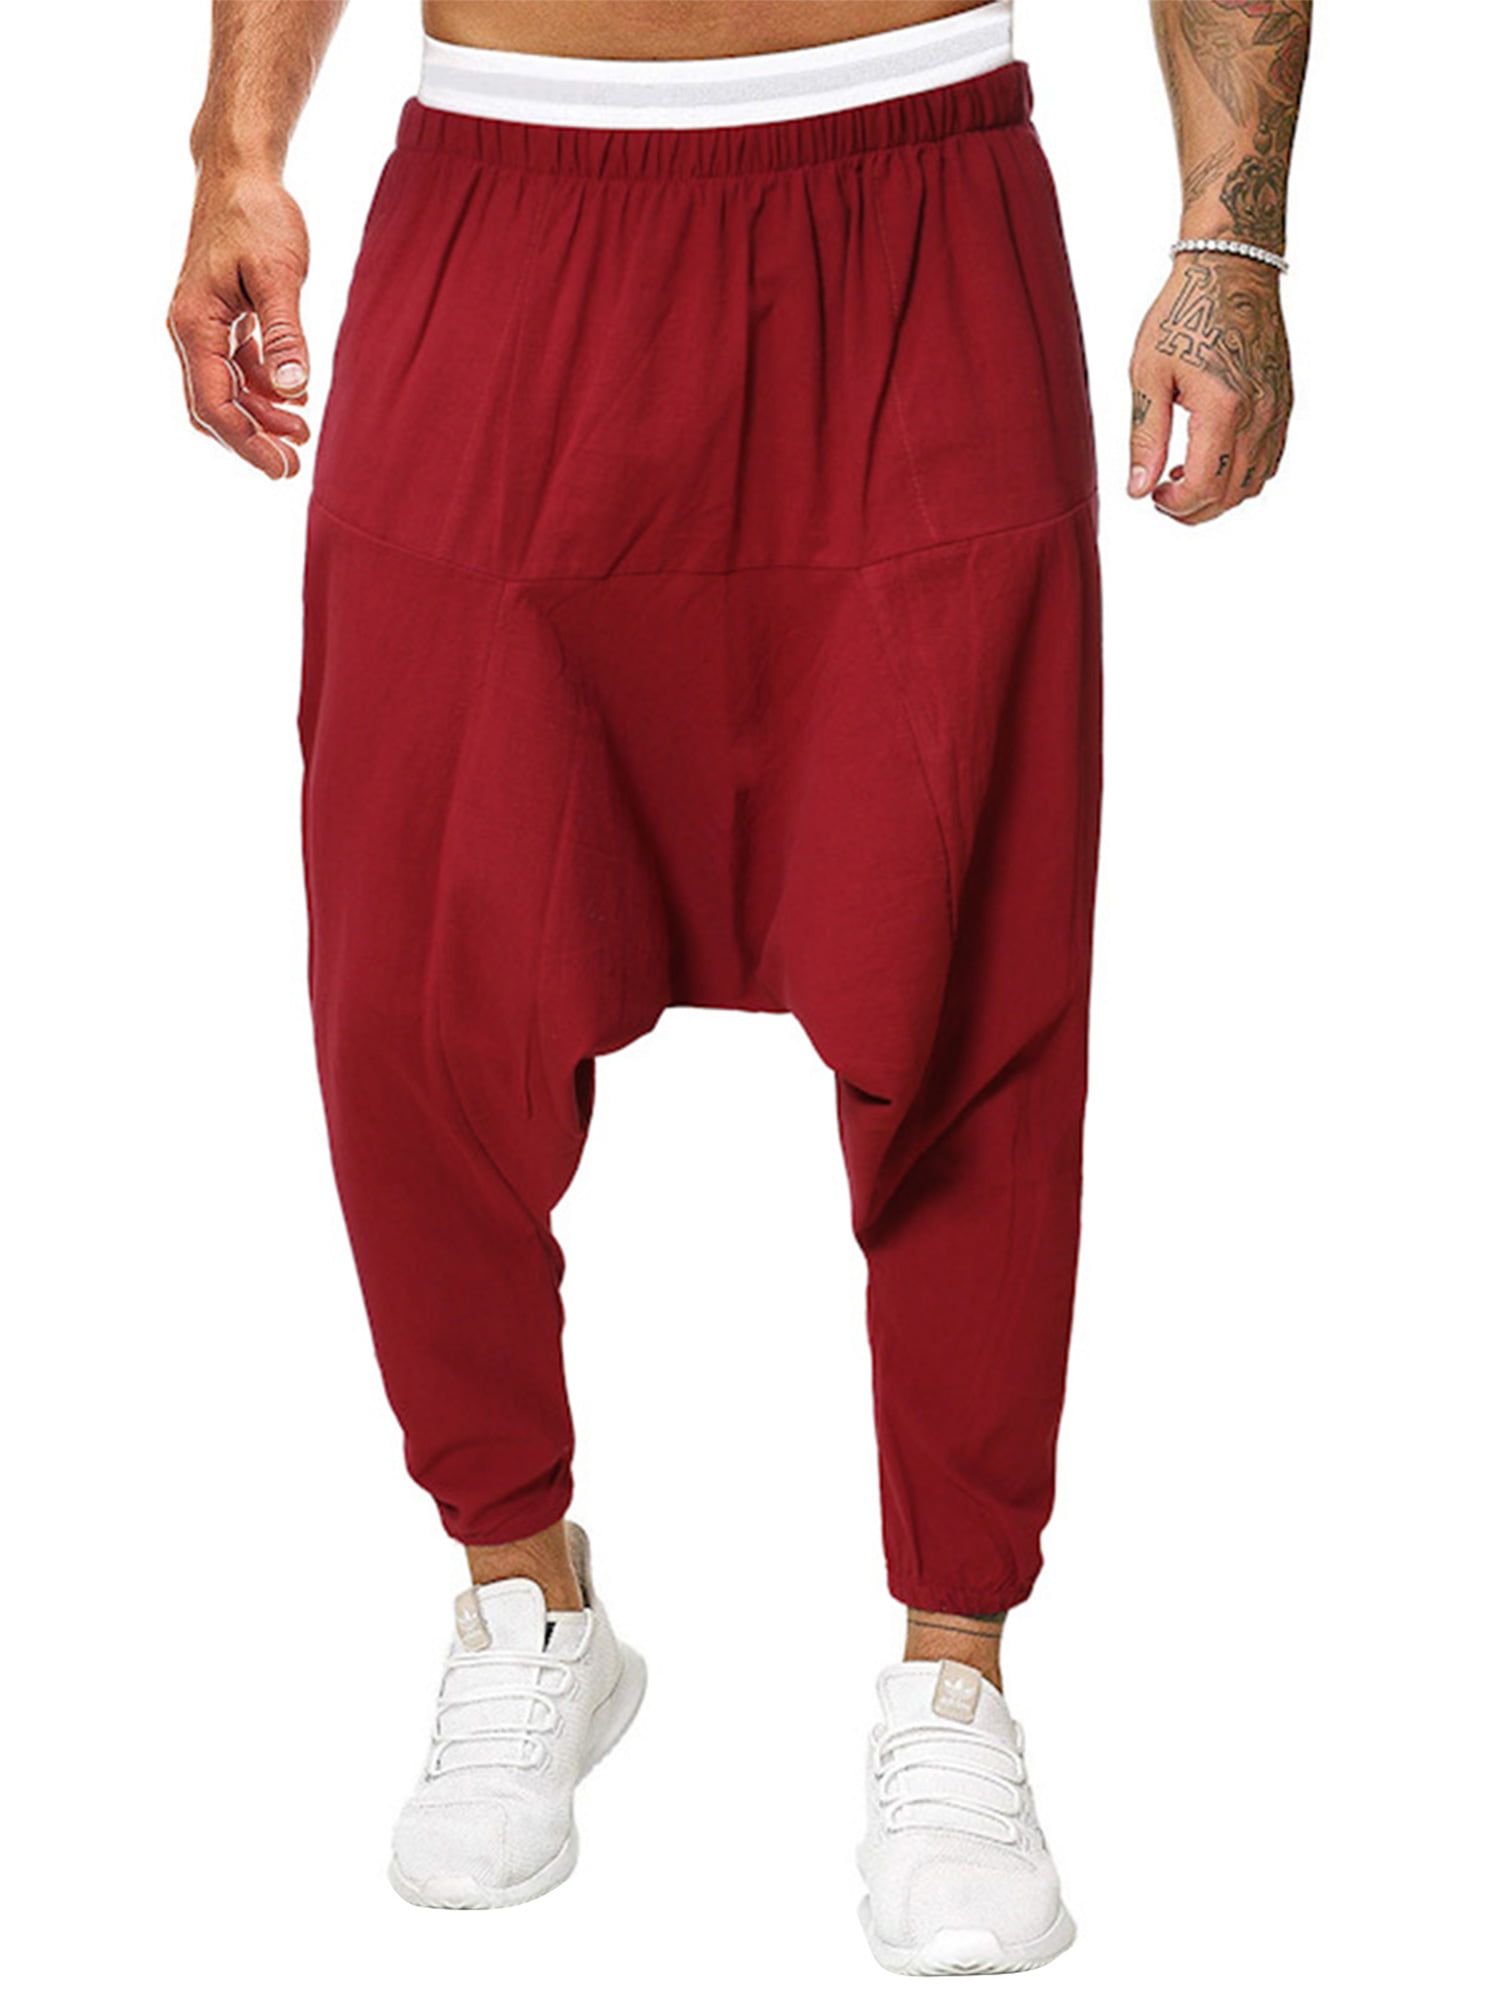 Mens Chinese Floral Cotton Linen Harem Trousers Loose Baggy Dance Bloomer Pants